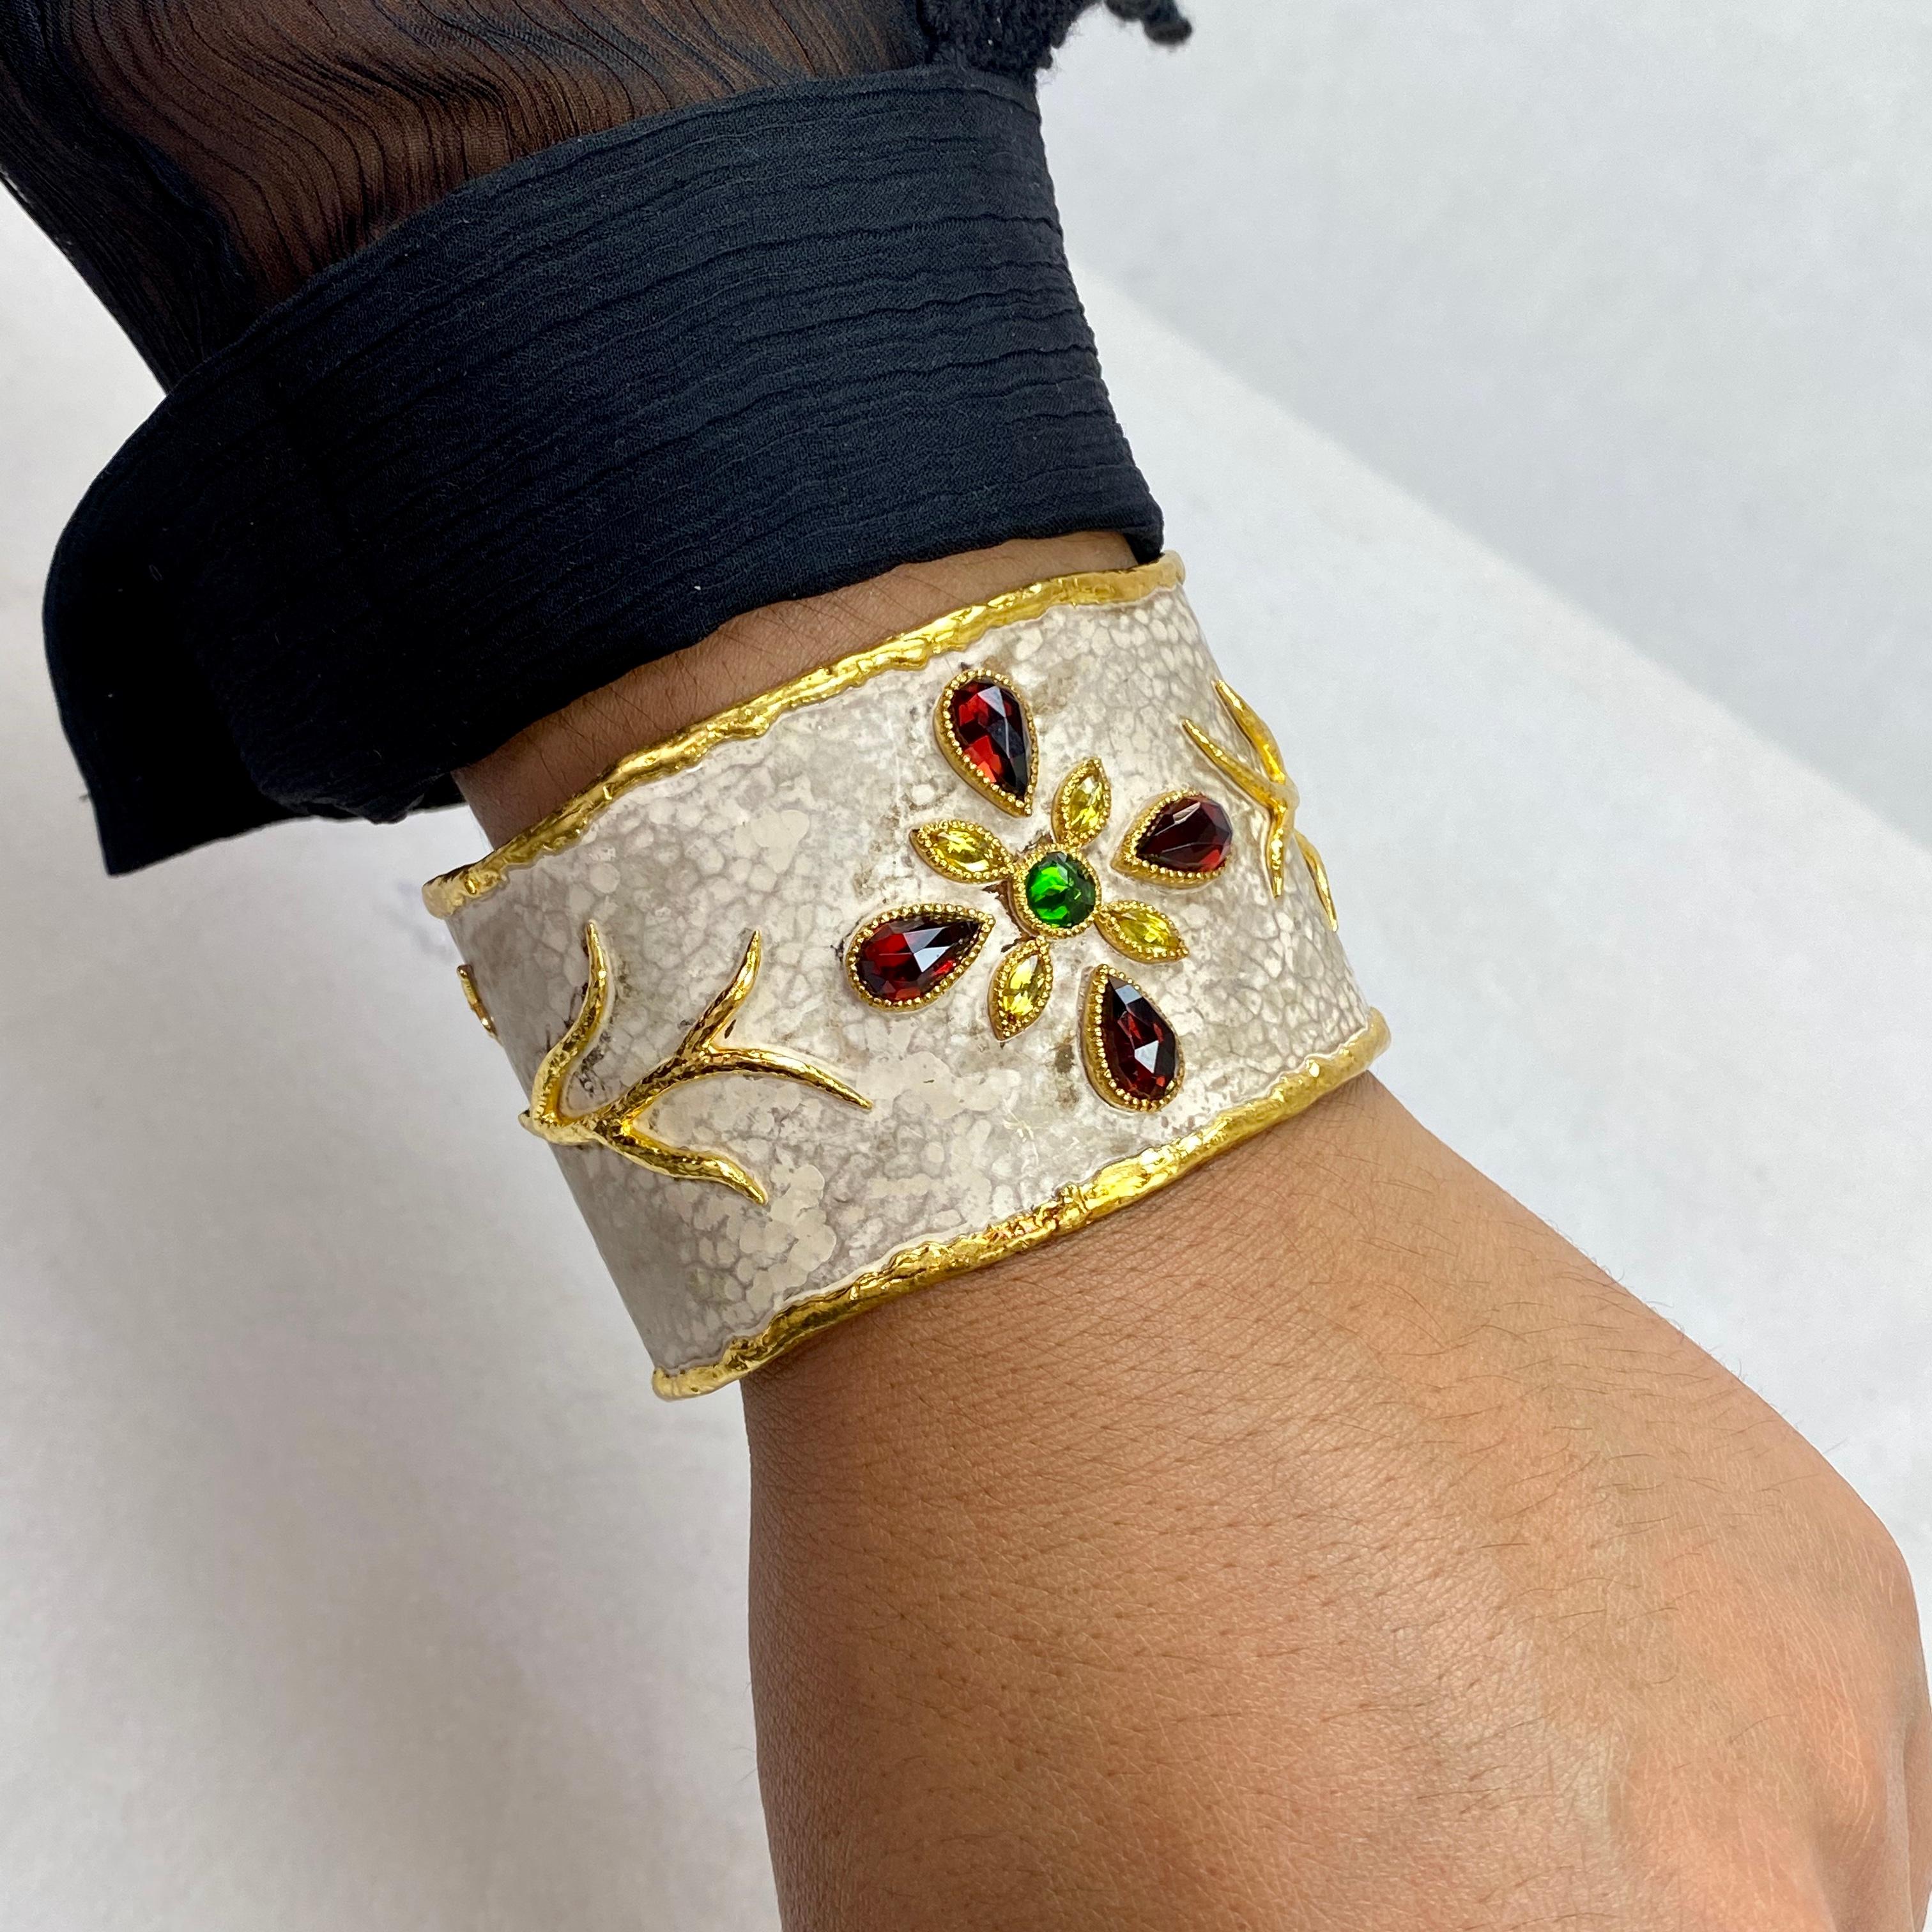 This cuff was designed and made by well known designer Victor Velyan.  It features 4 pear shaped, faceted deep red Garnets weighing 9.17 carats, 4 marquis shaped, faceted Yellow Sapphires weighing 1.19 carats and a single, round brilliant cut Chrome